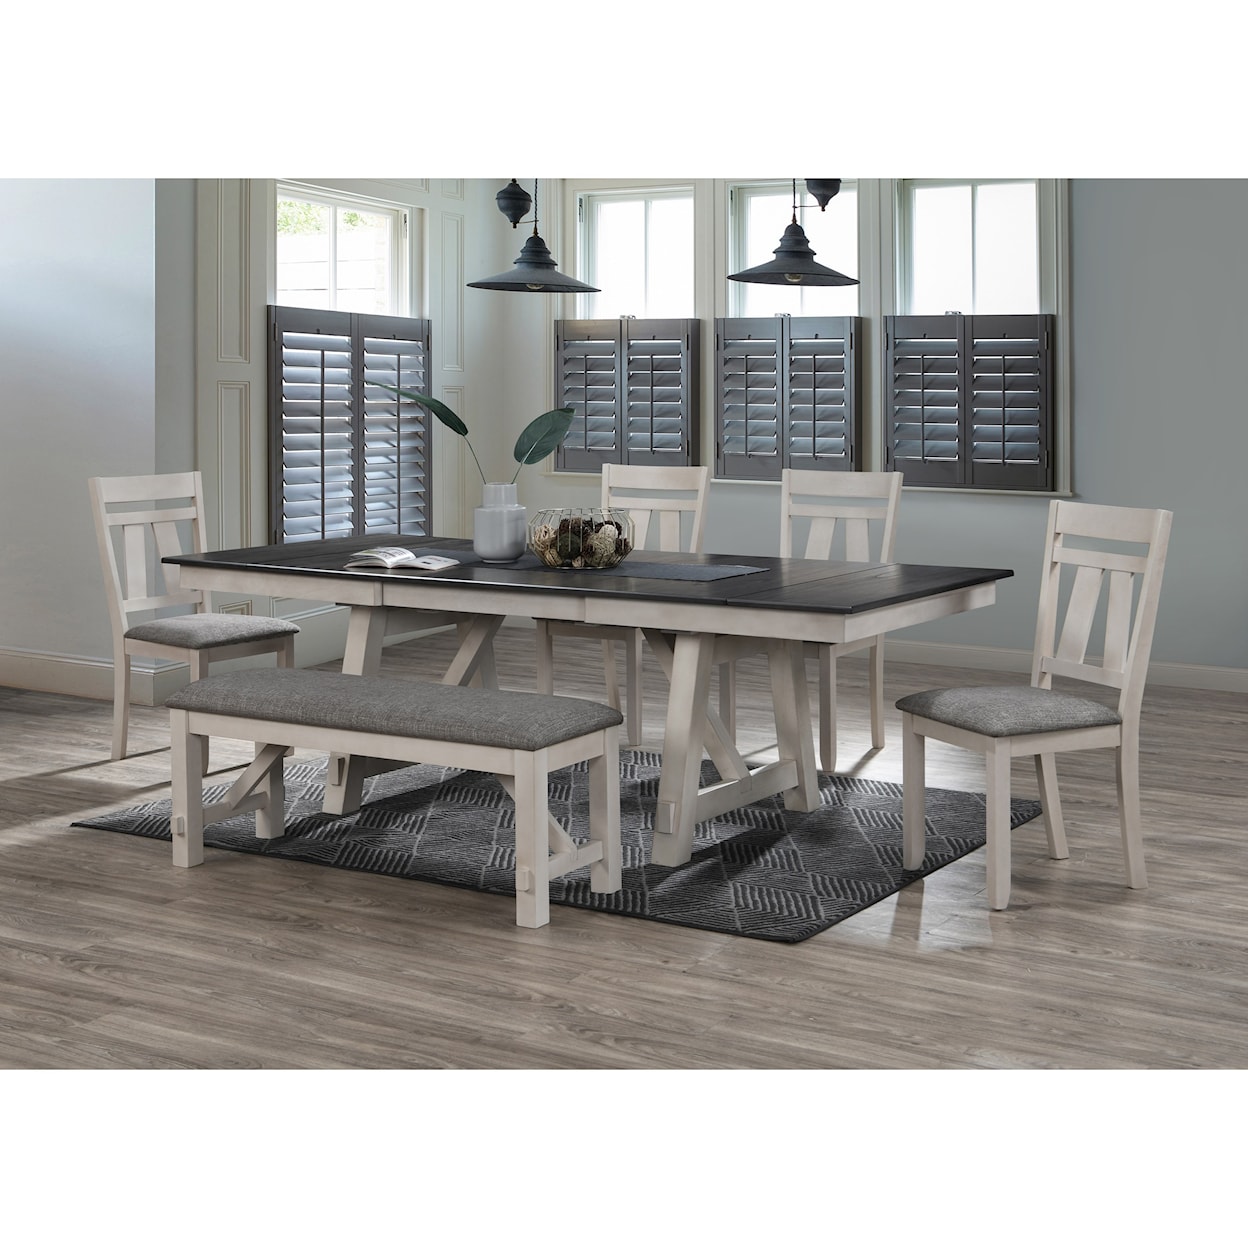 Crown Mark Maribelle 6-Piece Table and Chair Set with Bench